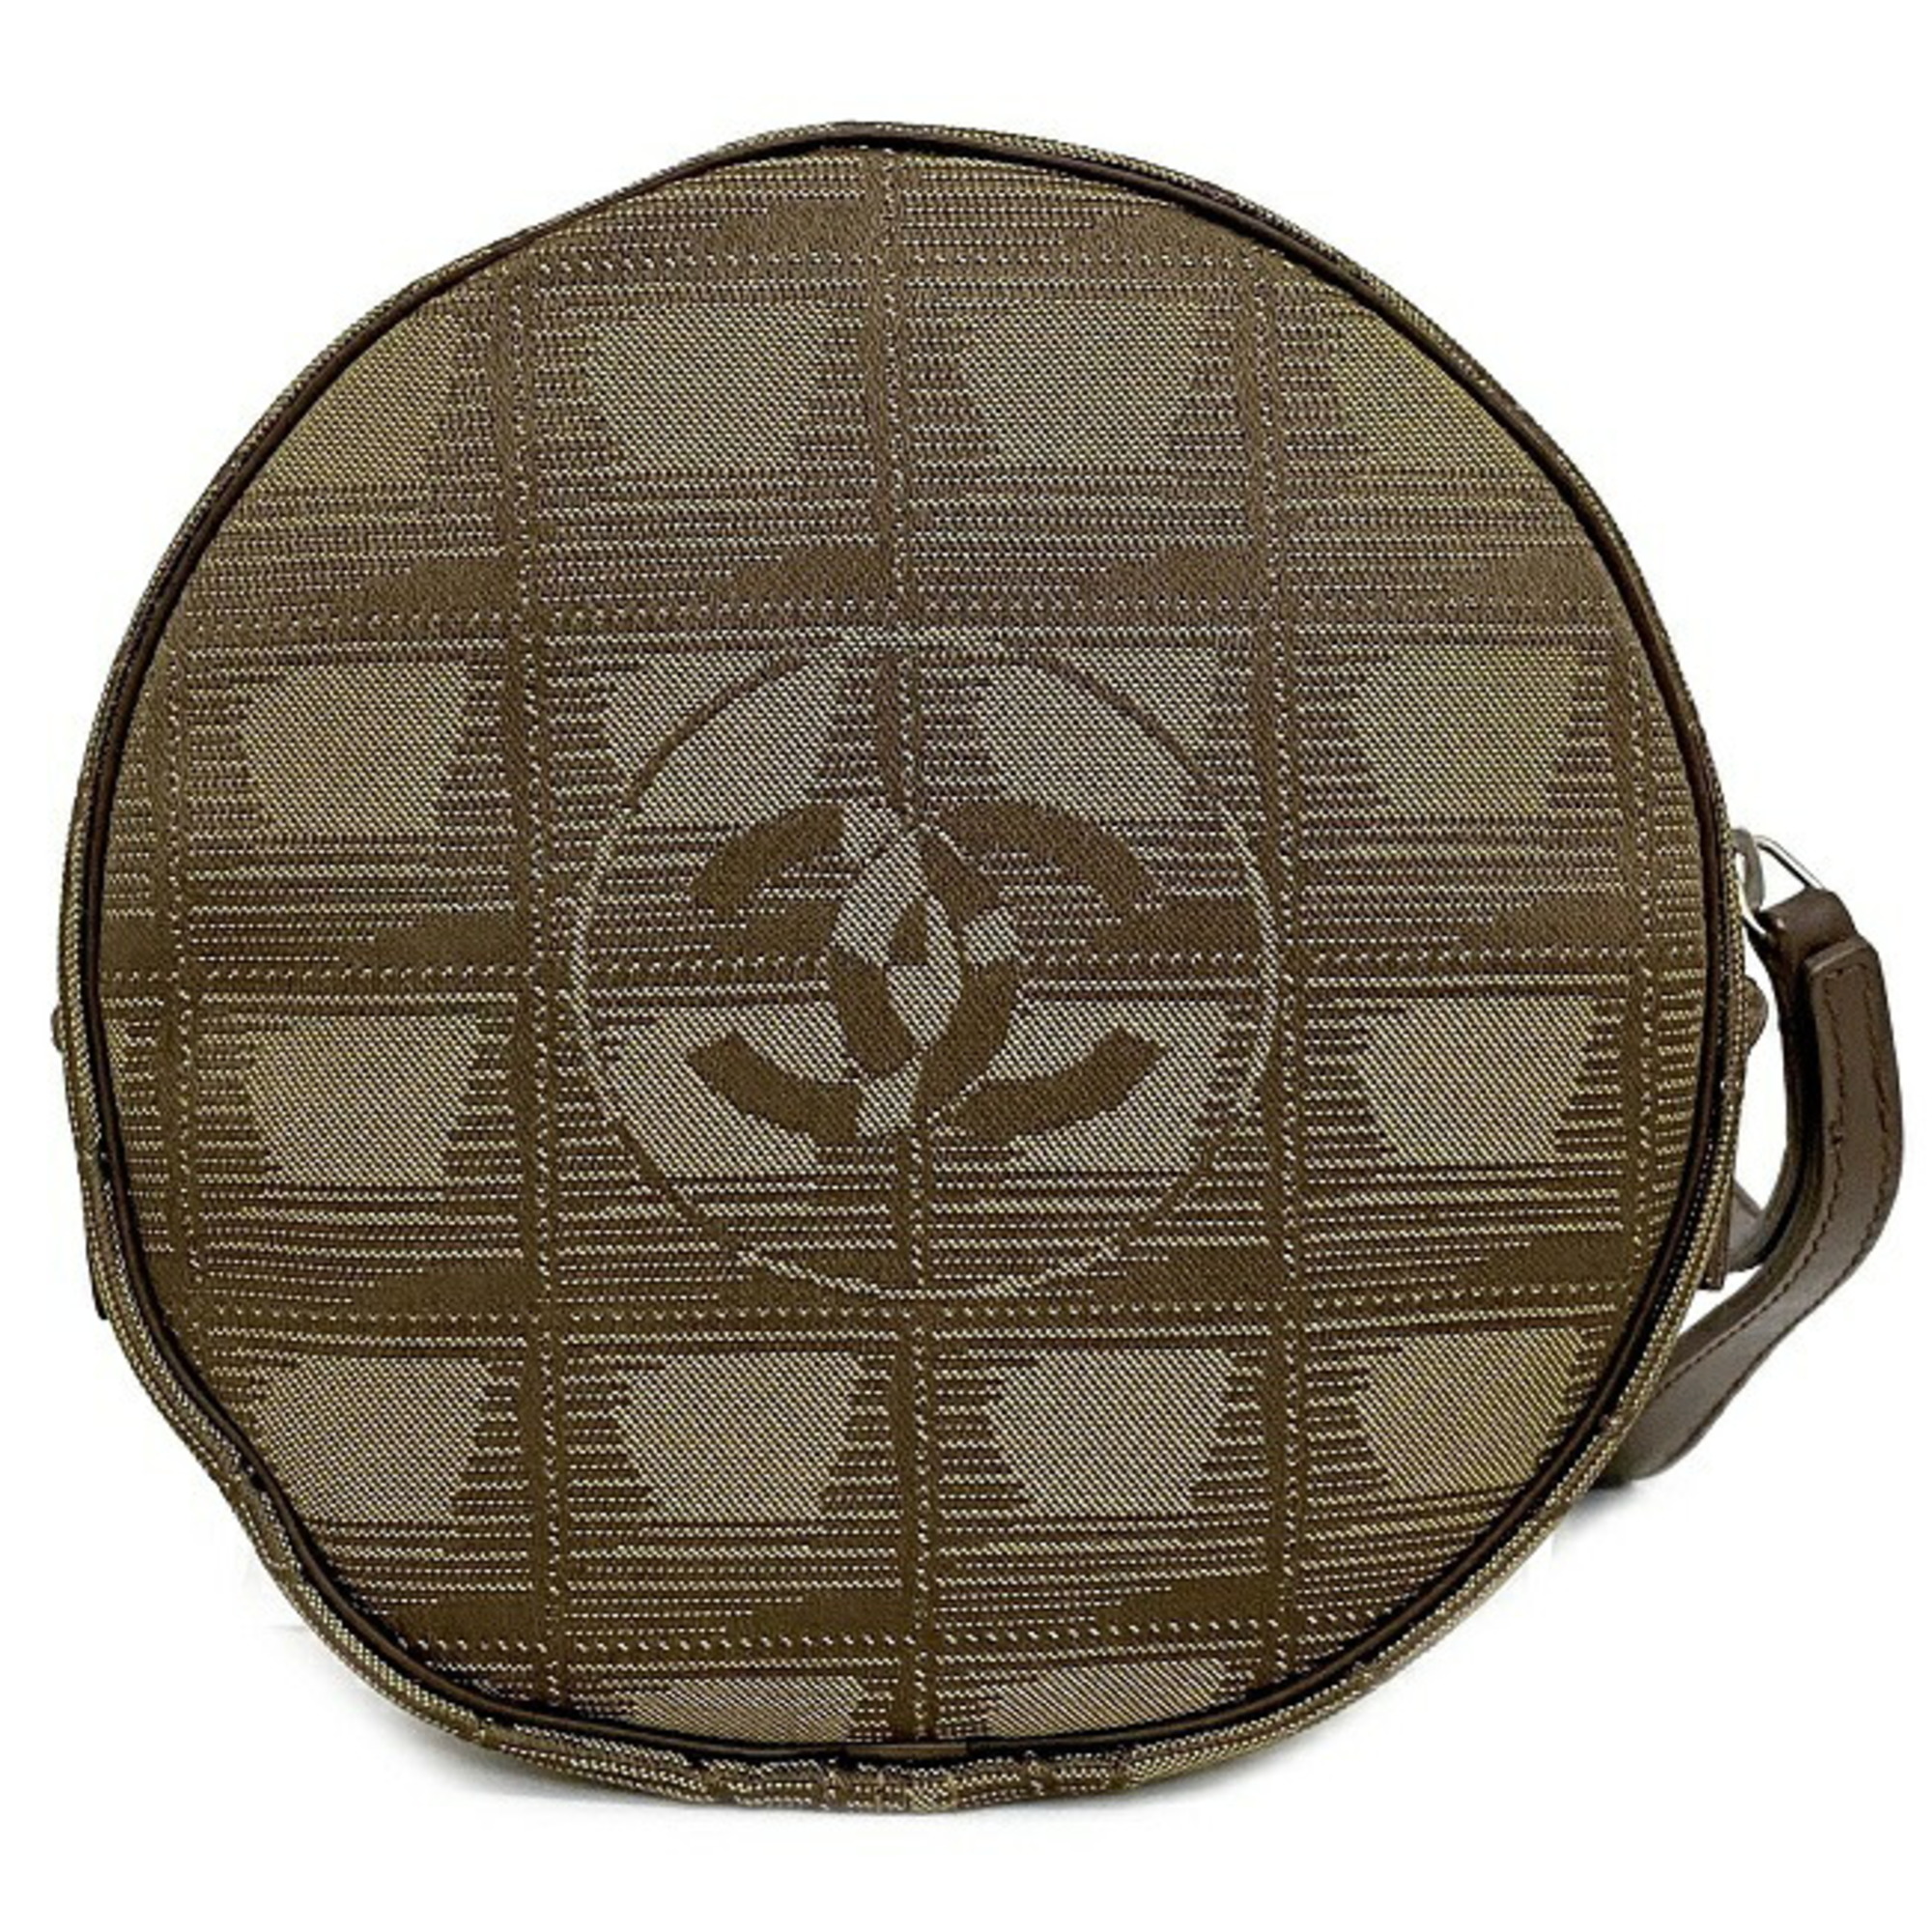 Chanel Pouch Khaki Green New Nylon Leather 7th CHANEL Round Nutra Coco Mark Strap Women's